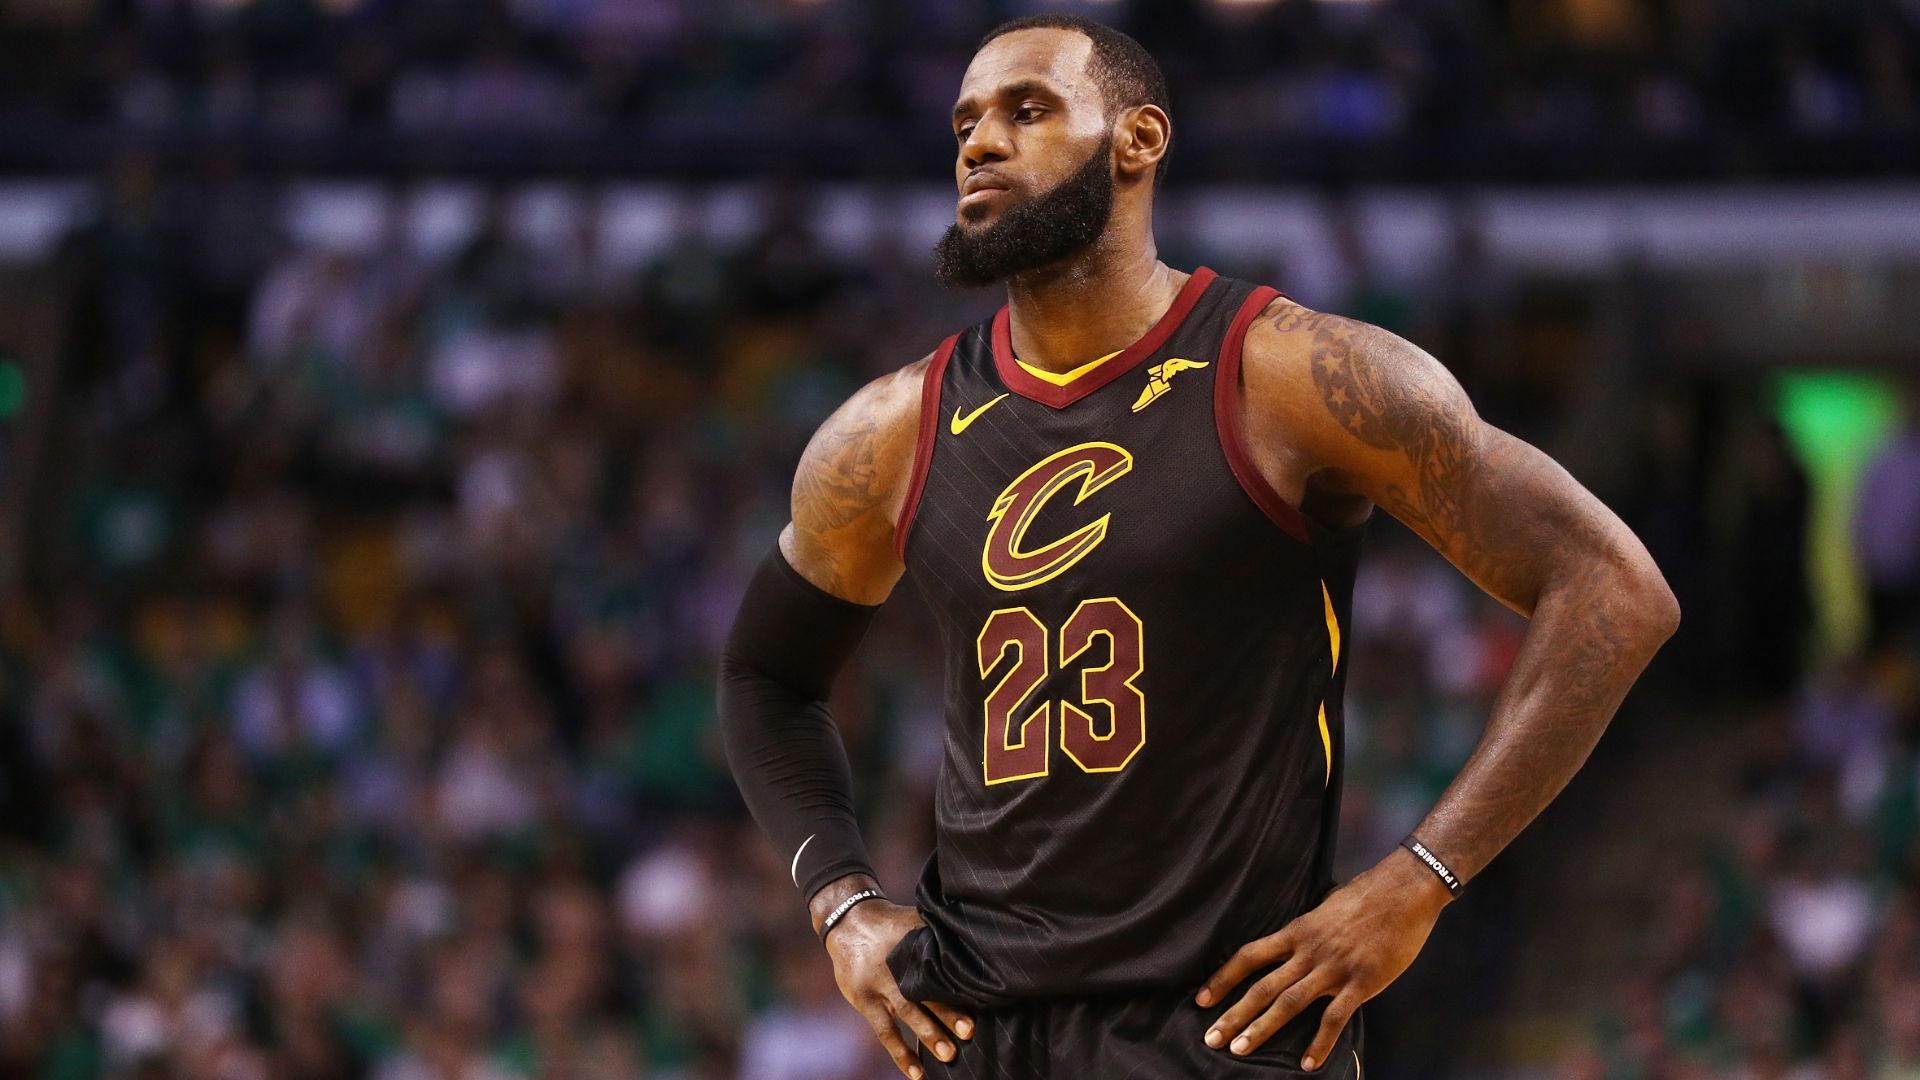 Is this the end for LeBron and the Cavs?